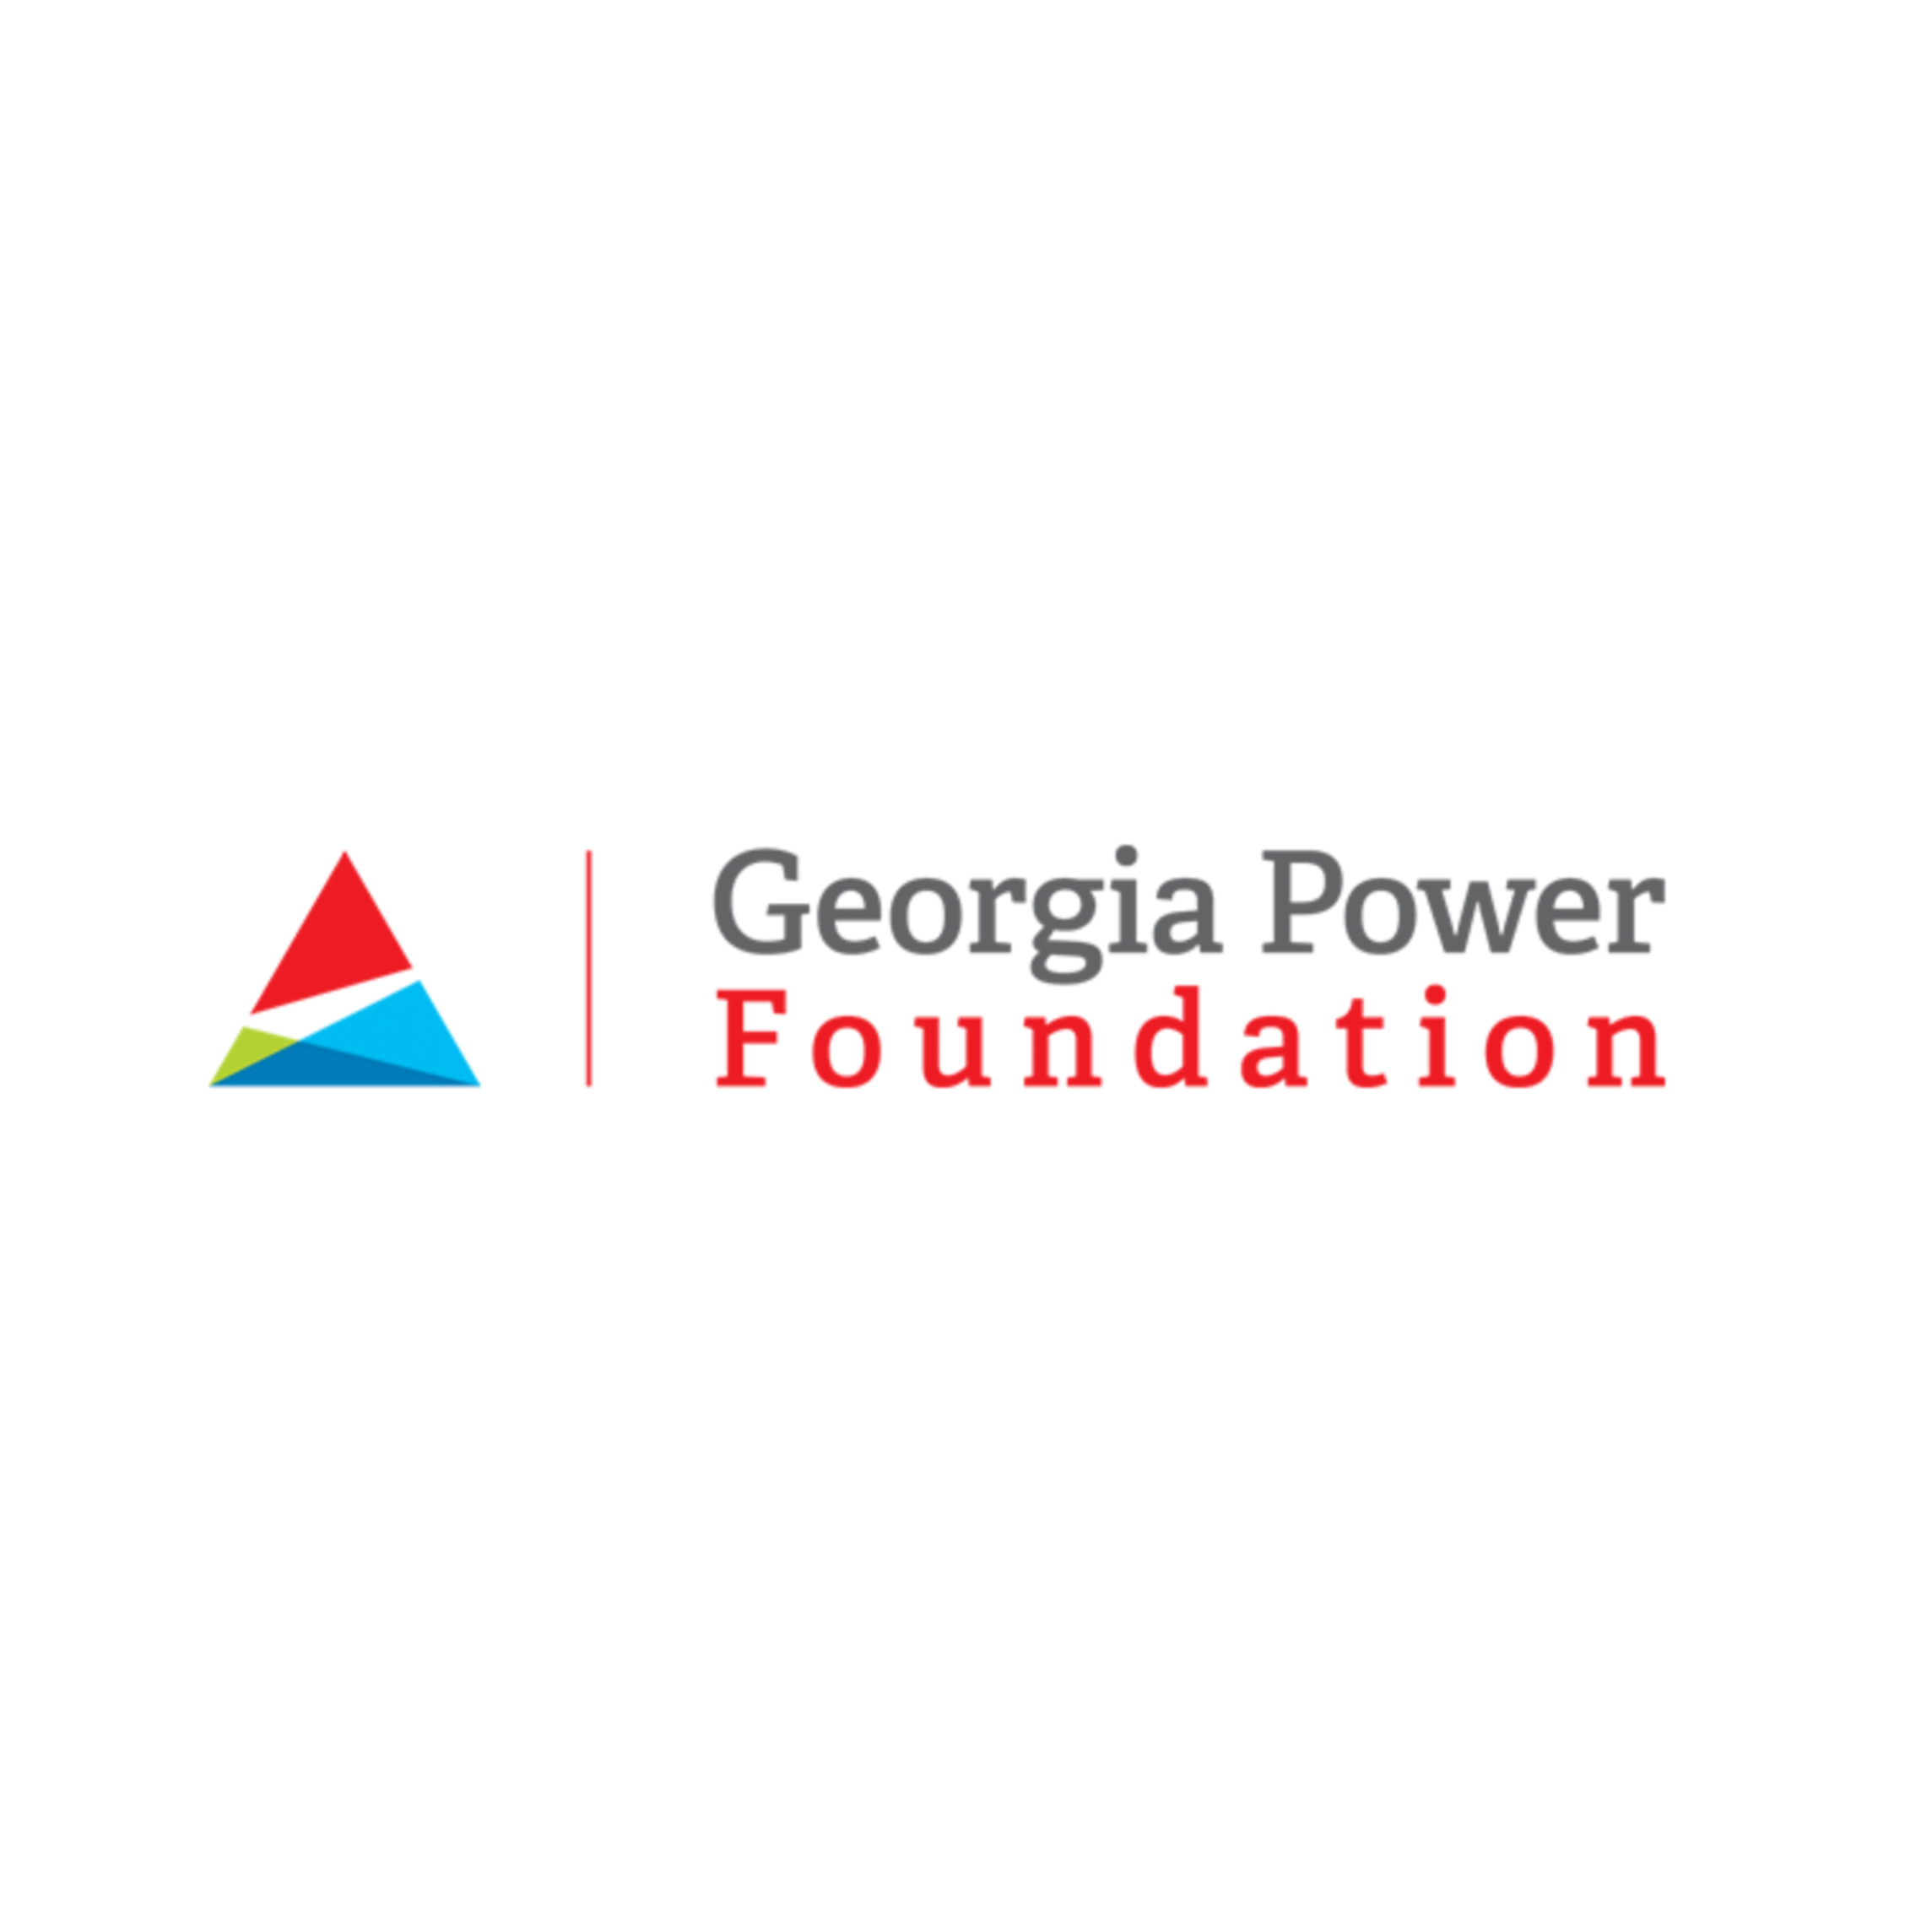 Georgia Power Foundation Supports theClubhou.se